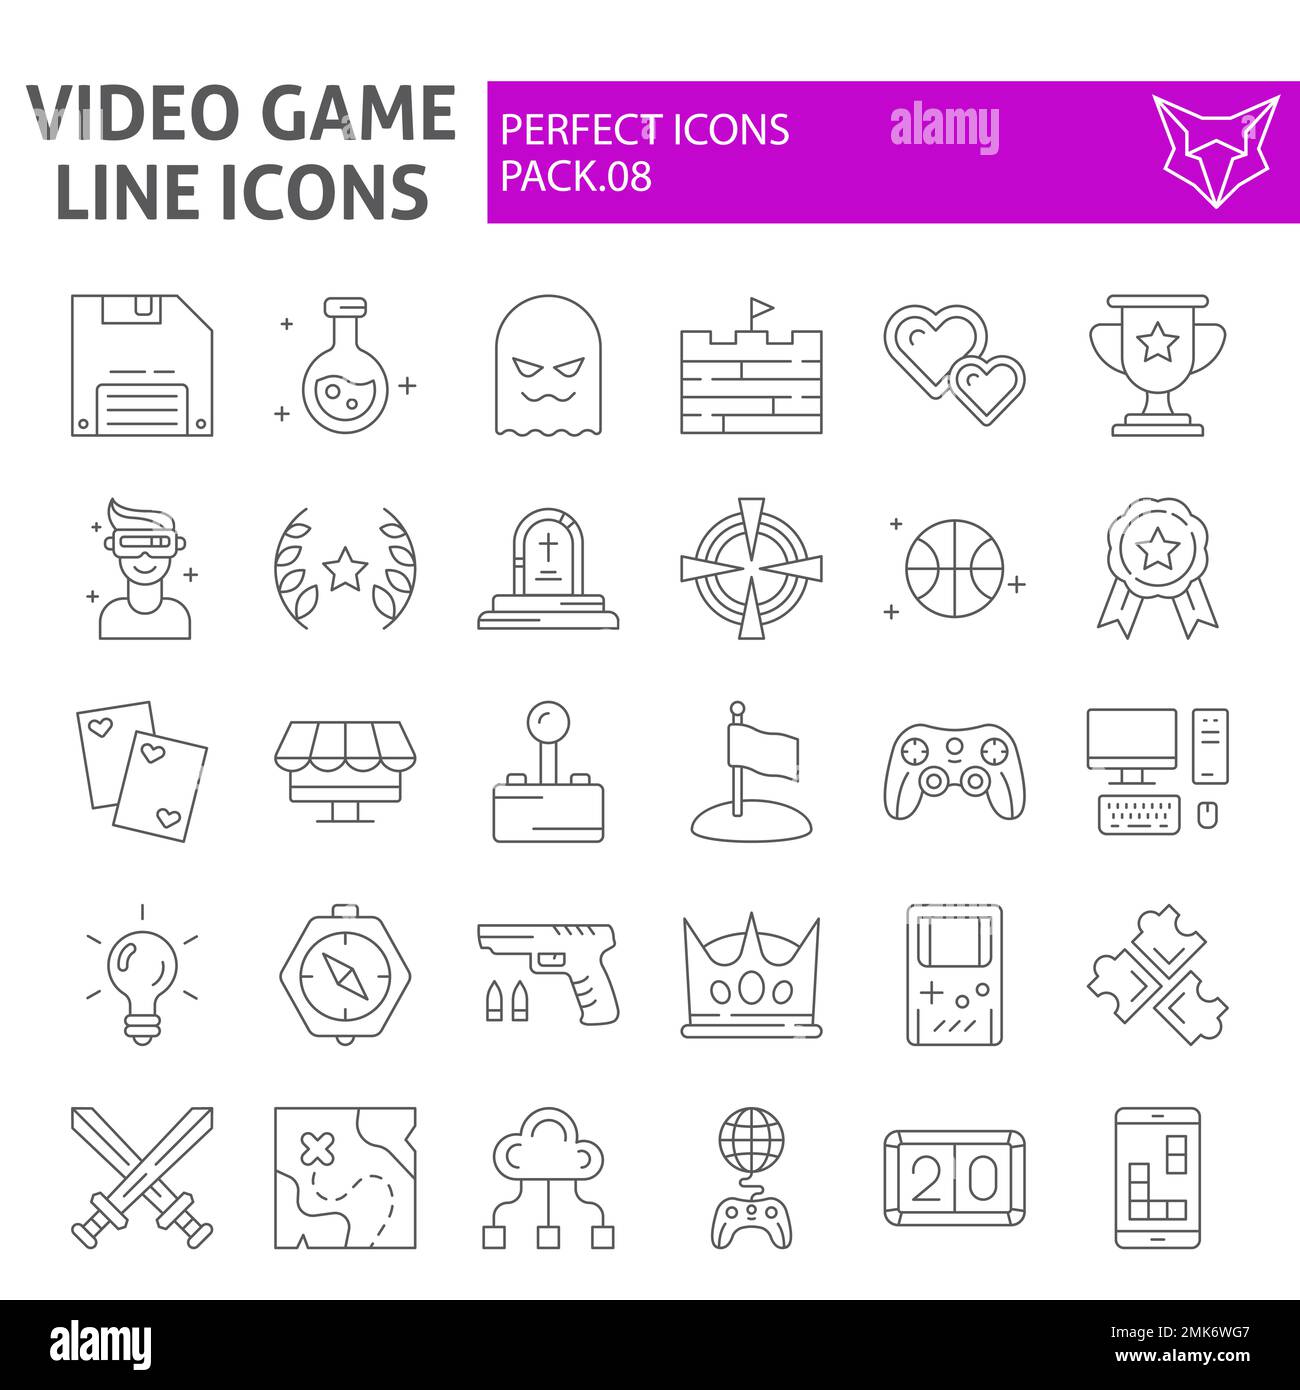 Video game thin line icon set, play symbols collection, vector sketches, logo illustrations, player signs linear pictograms package isolated on white background, eps 10. Stock Vector